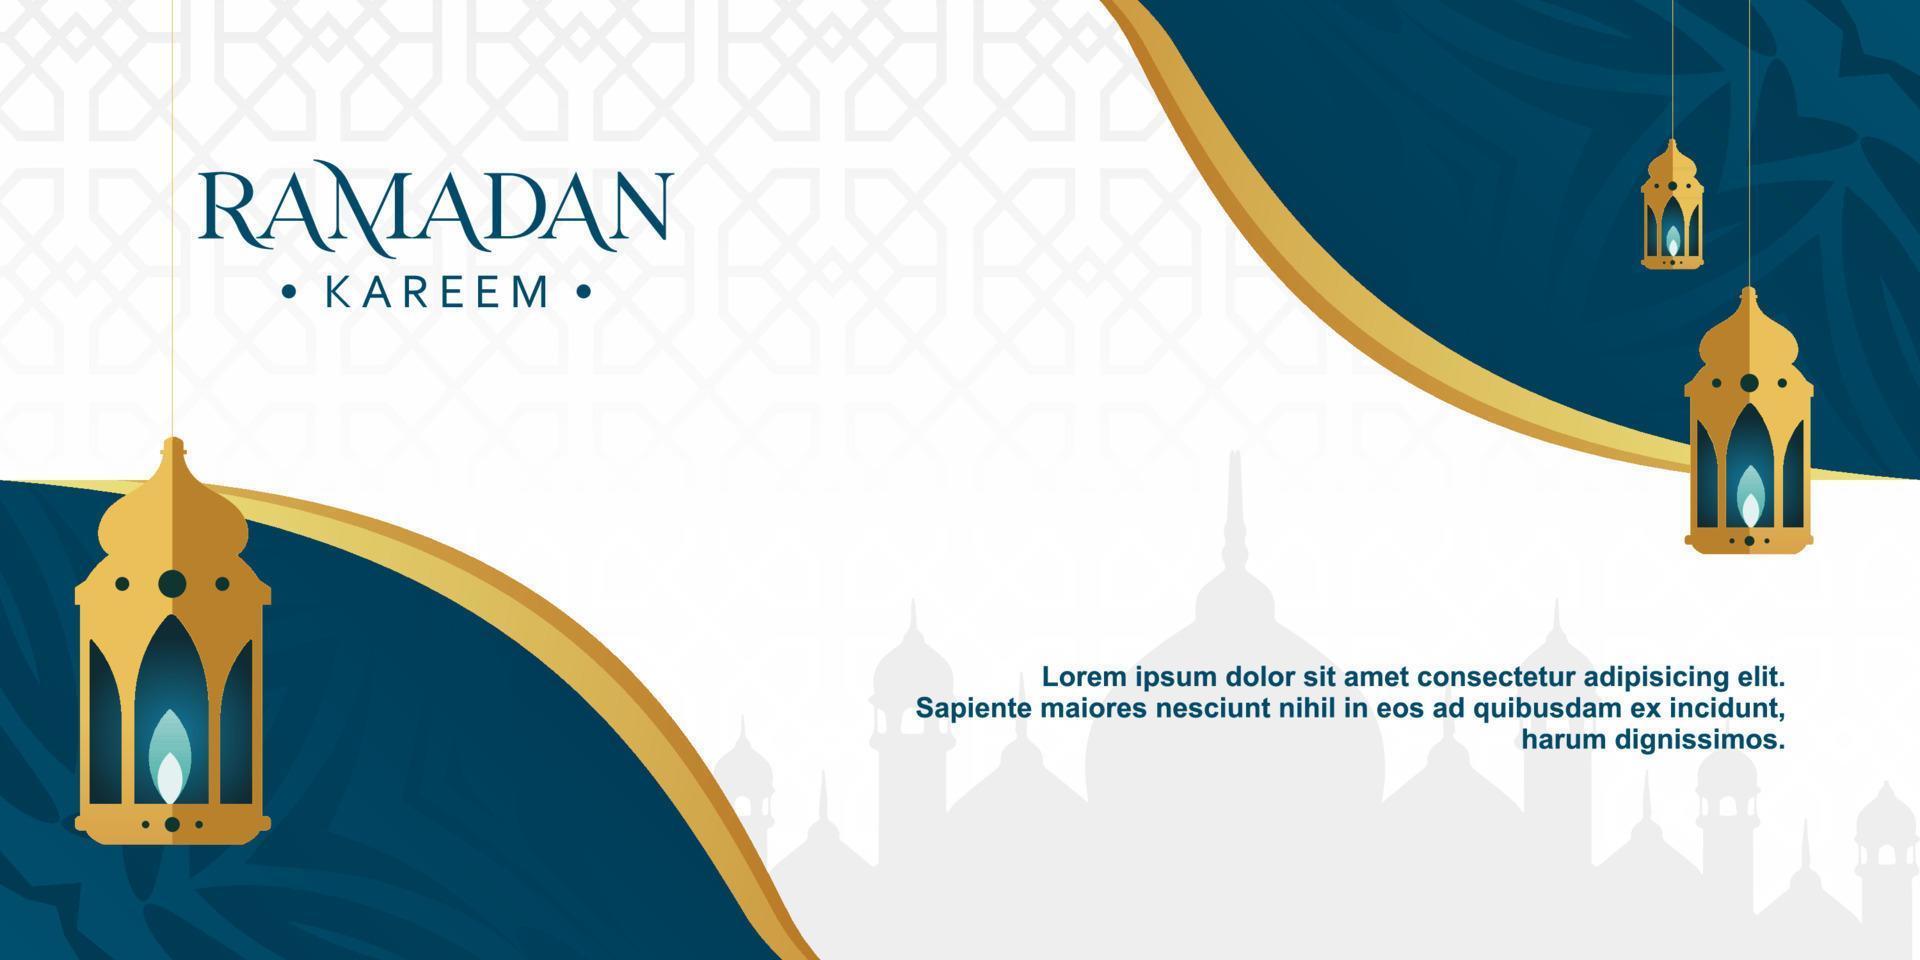 Ramadan Kareem Background Design. Vector illustration for greeting cards, posters and banners